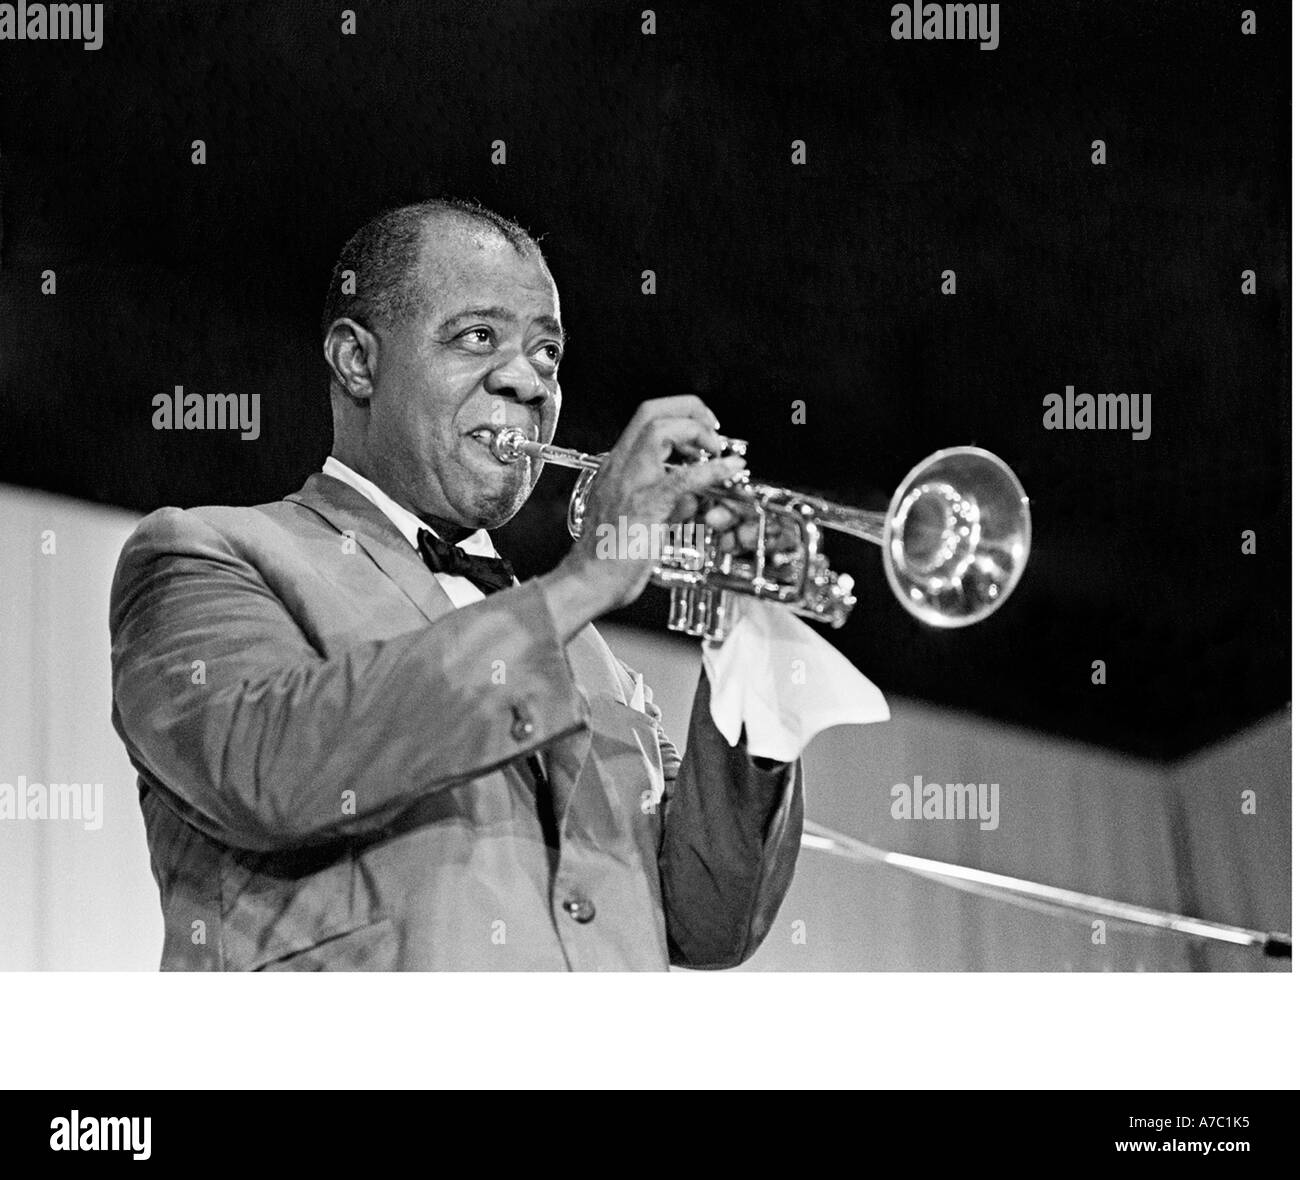 LOUIS ARMSTRONG GLOSSY POSTER PICTURE PHOTO PRINT SATCHMO JAZZ TRUMPETER ACTOR 5 